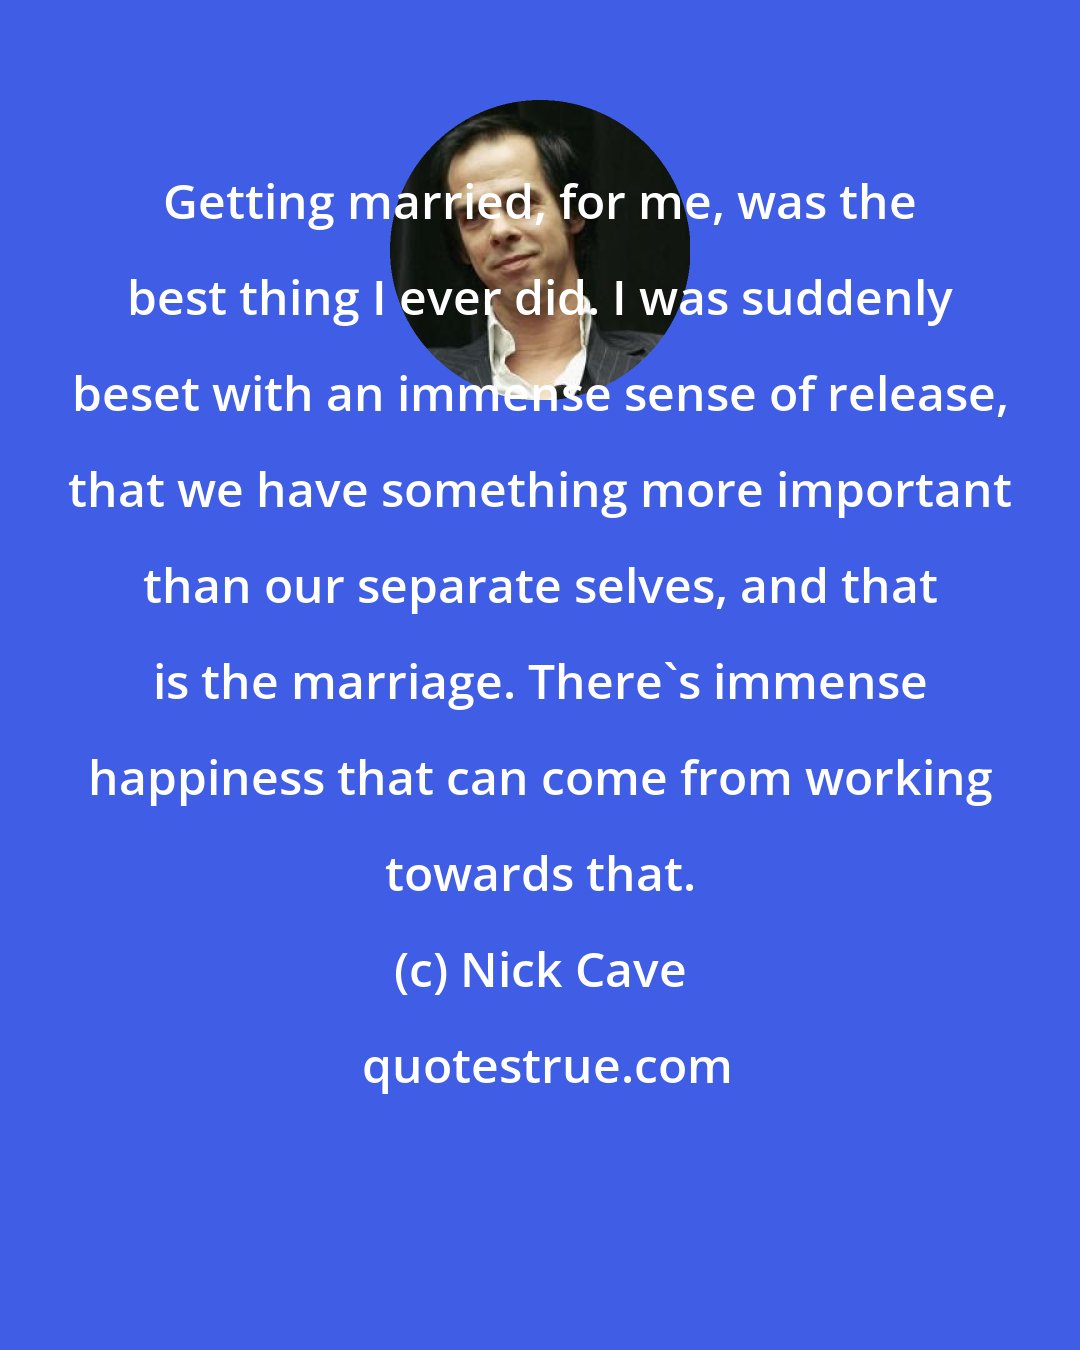 Nick Cave: Getting married, for me, was the best thing I ever did. I was suddenly beset with an immense sense of release, that we have something more important than our separate selves, and that is the marriage. There's immense happiness that can come from working towards that.